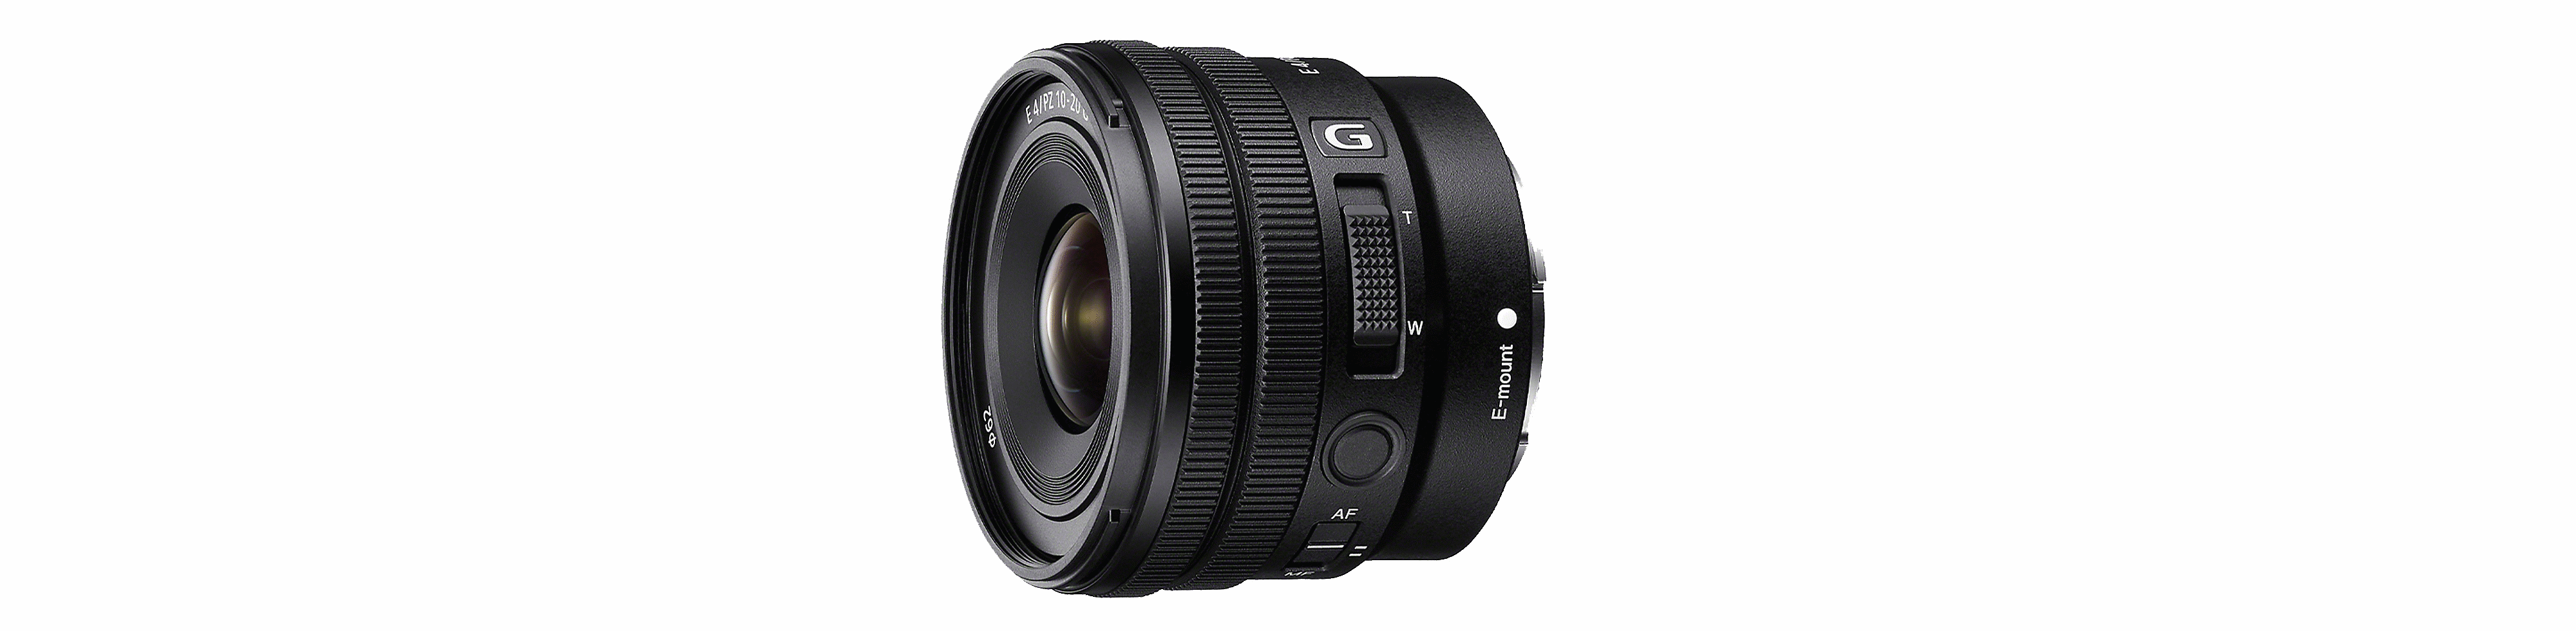 Image of lens front view